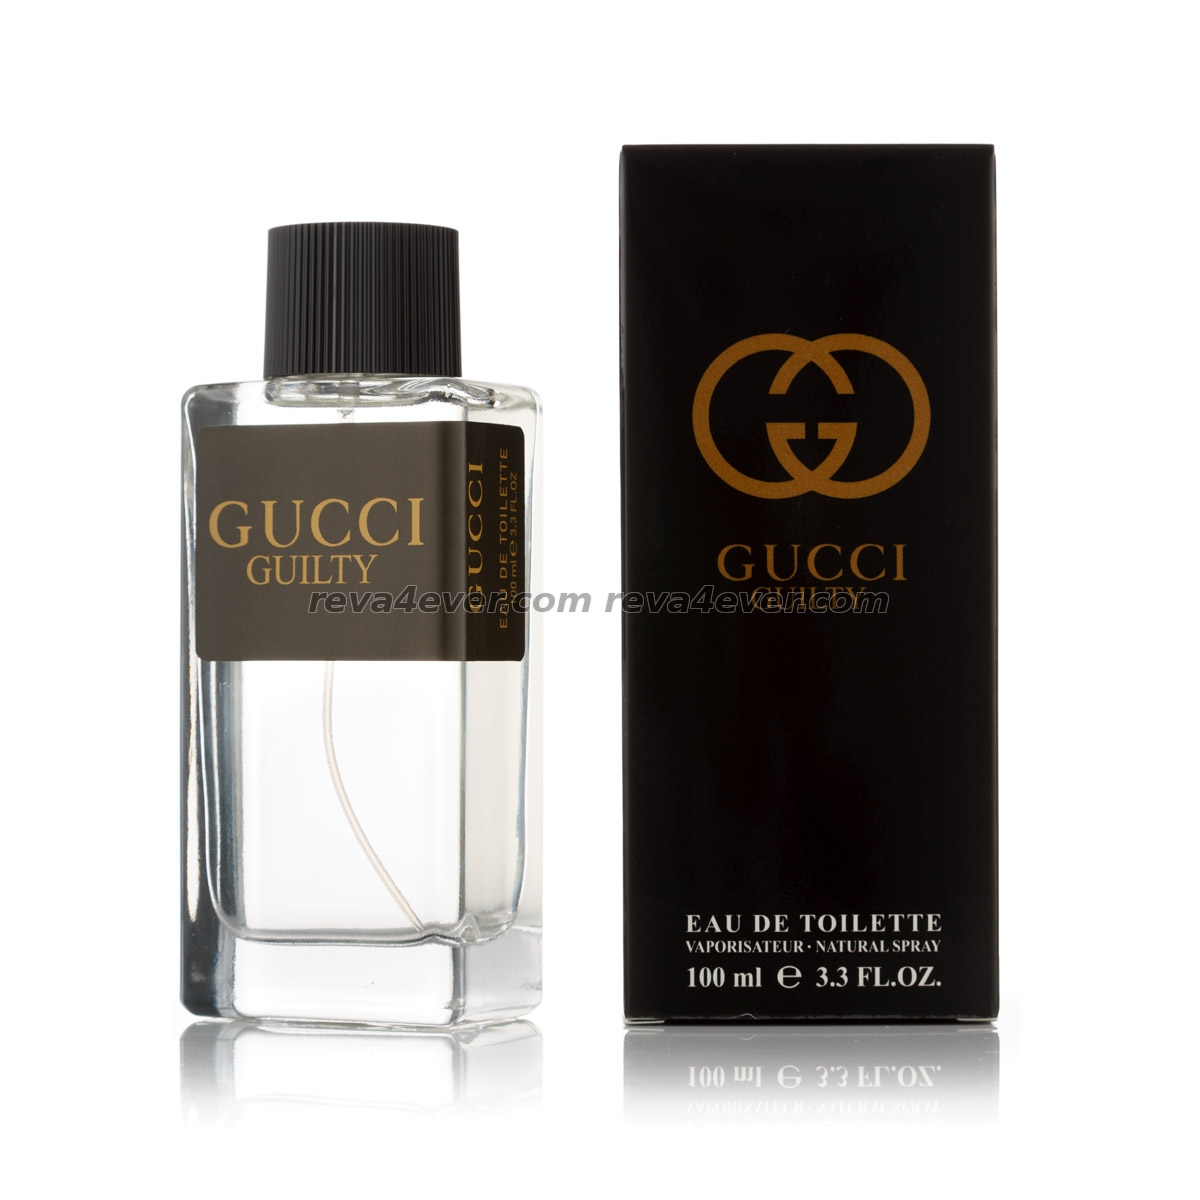 Gucci Guilty edt 100ml Imperatrice style